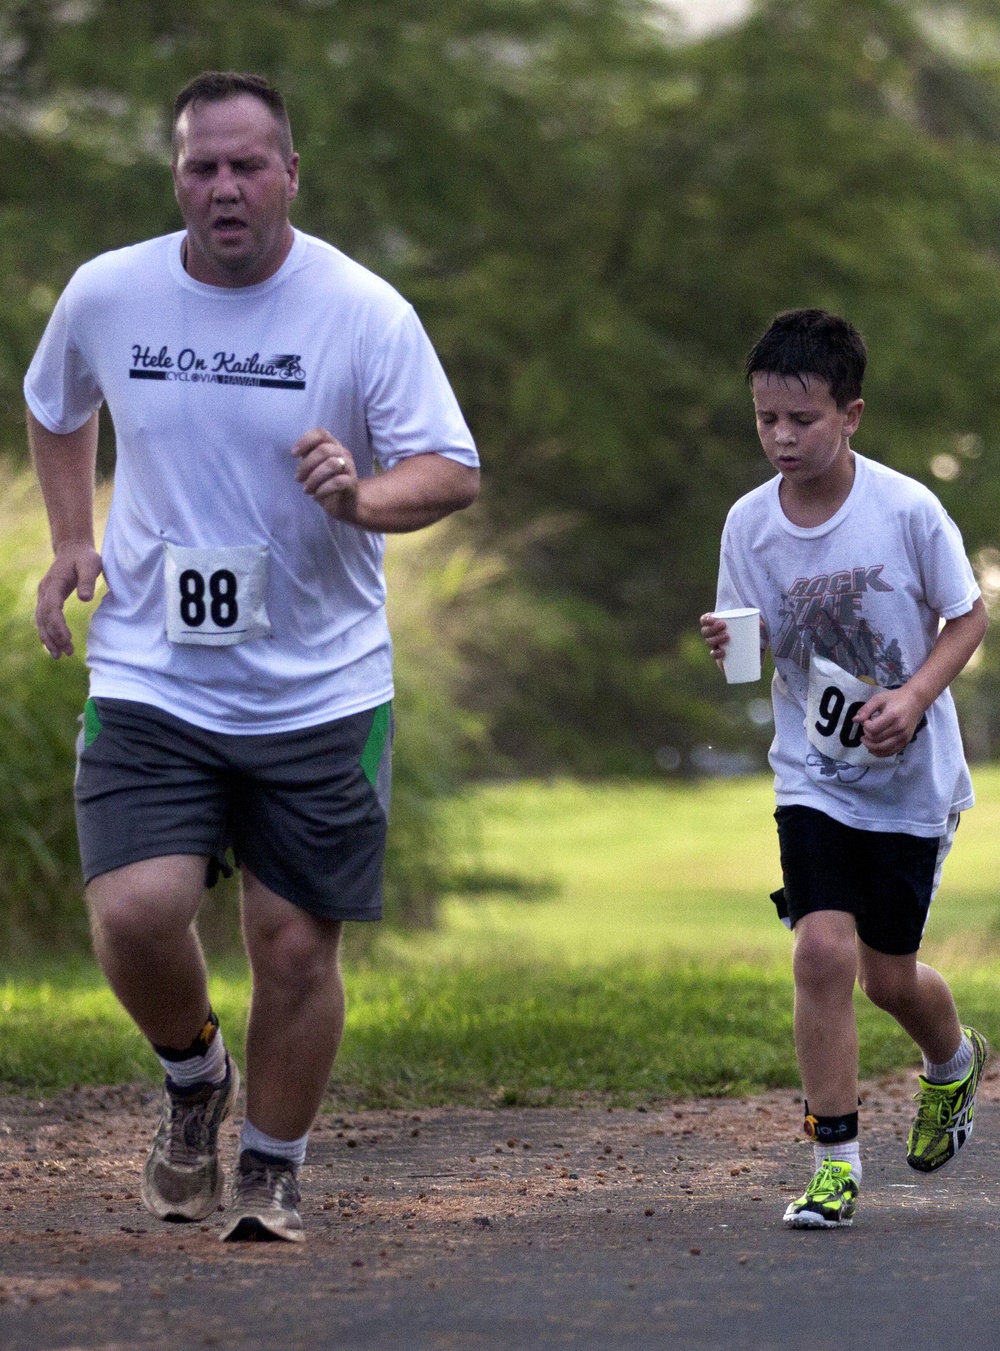 More than 100 run with morning sun during Surf and Turf 5K race